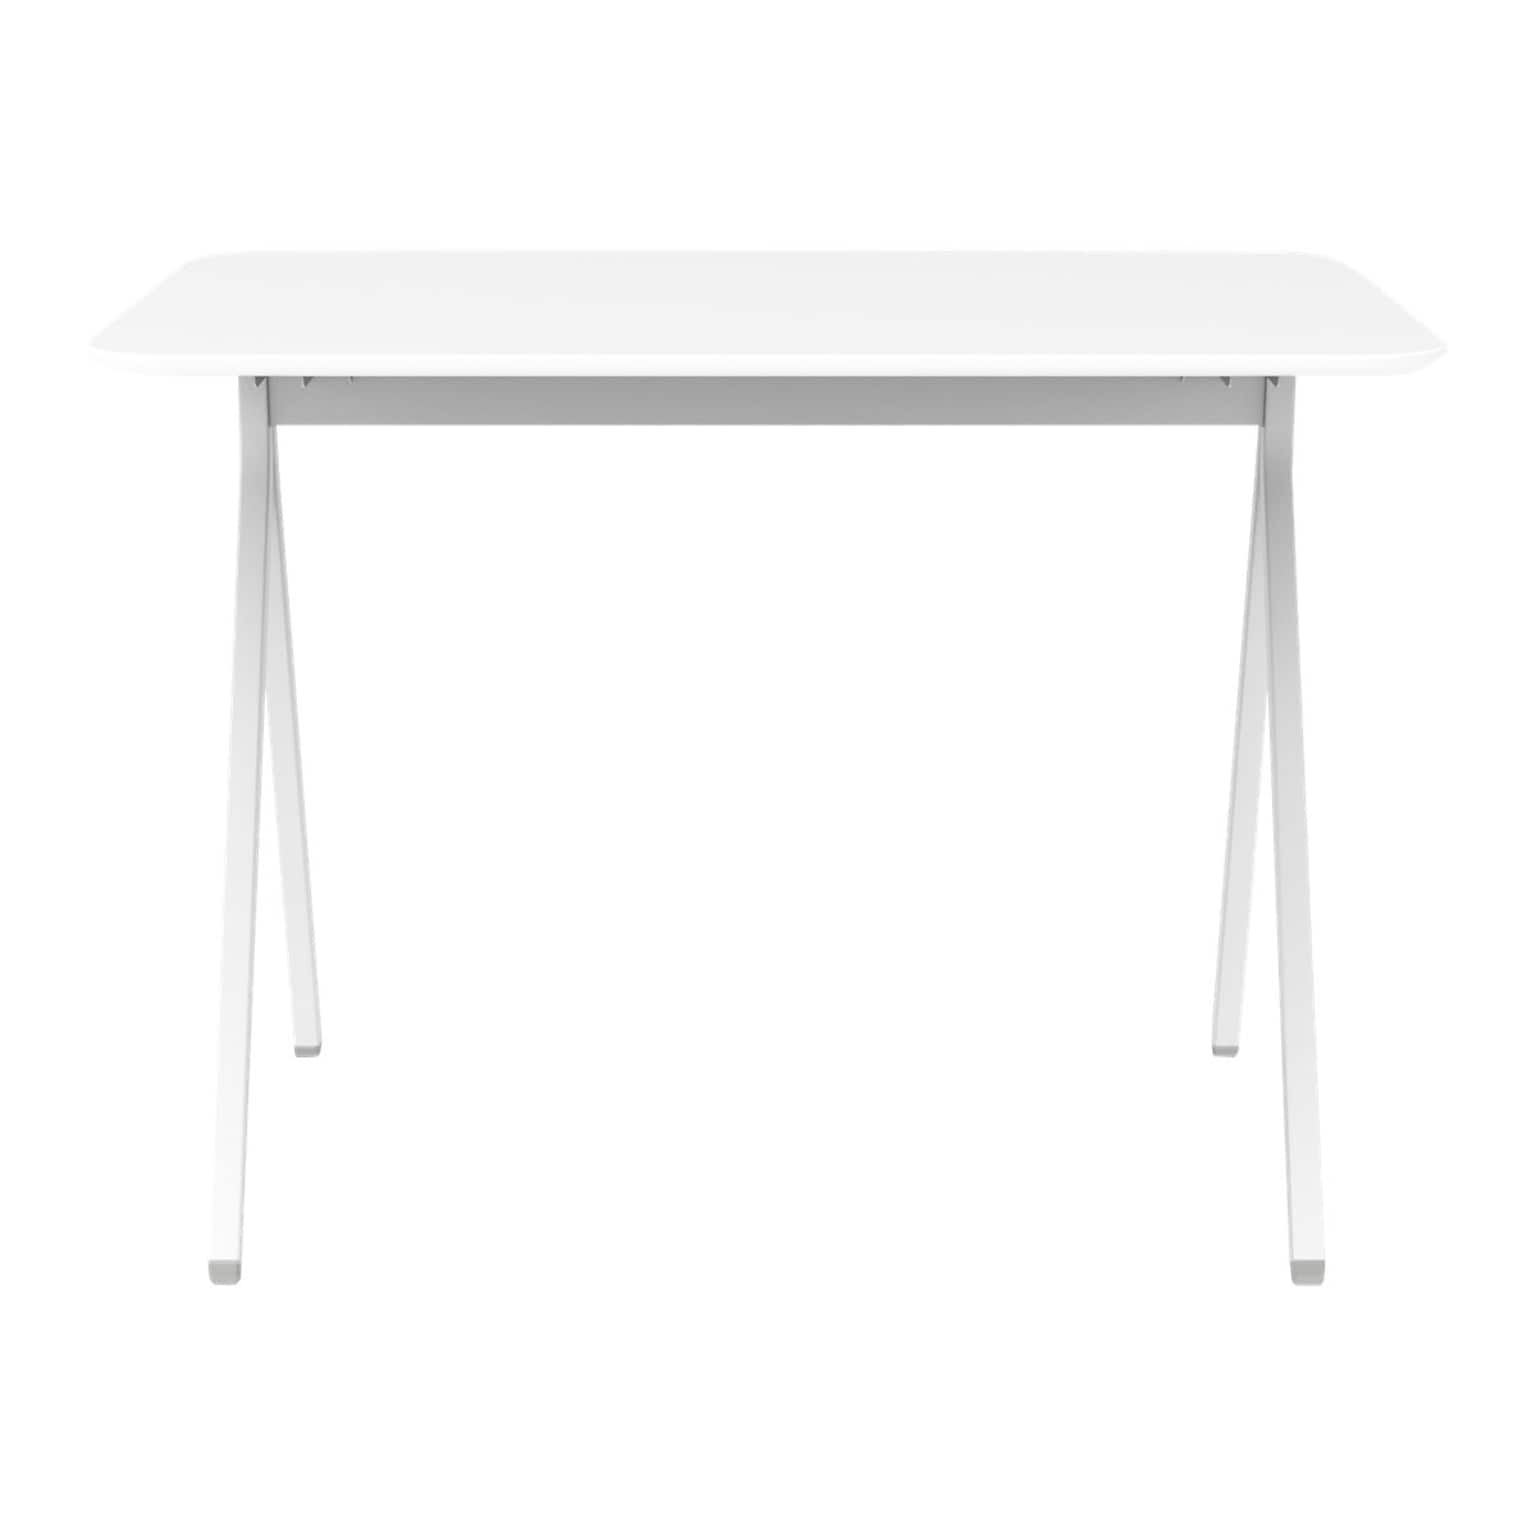 Poppin The Key-to-Success 40 MDF Table, White (107773)